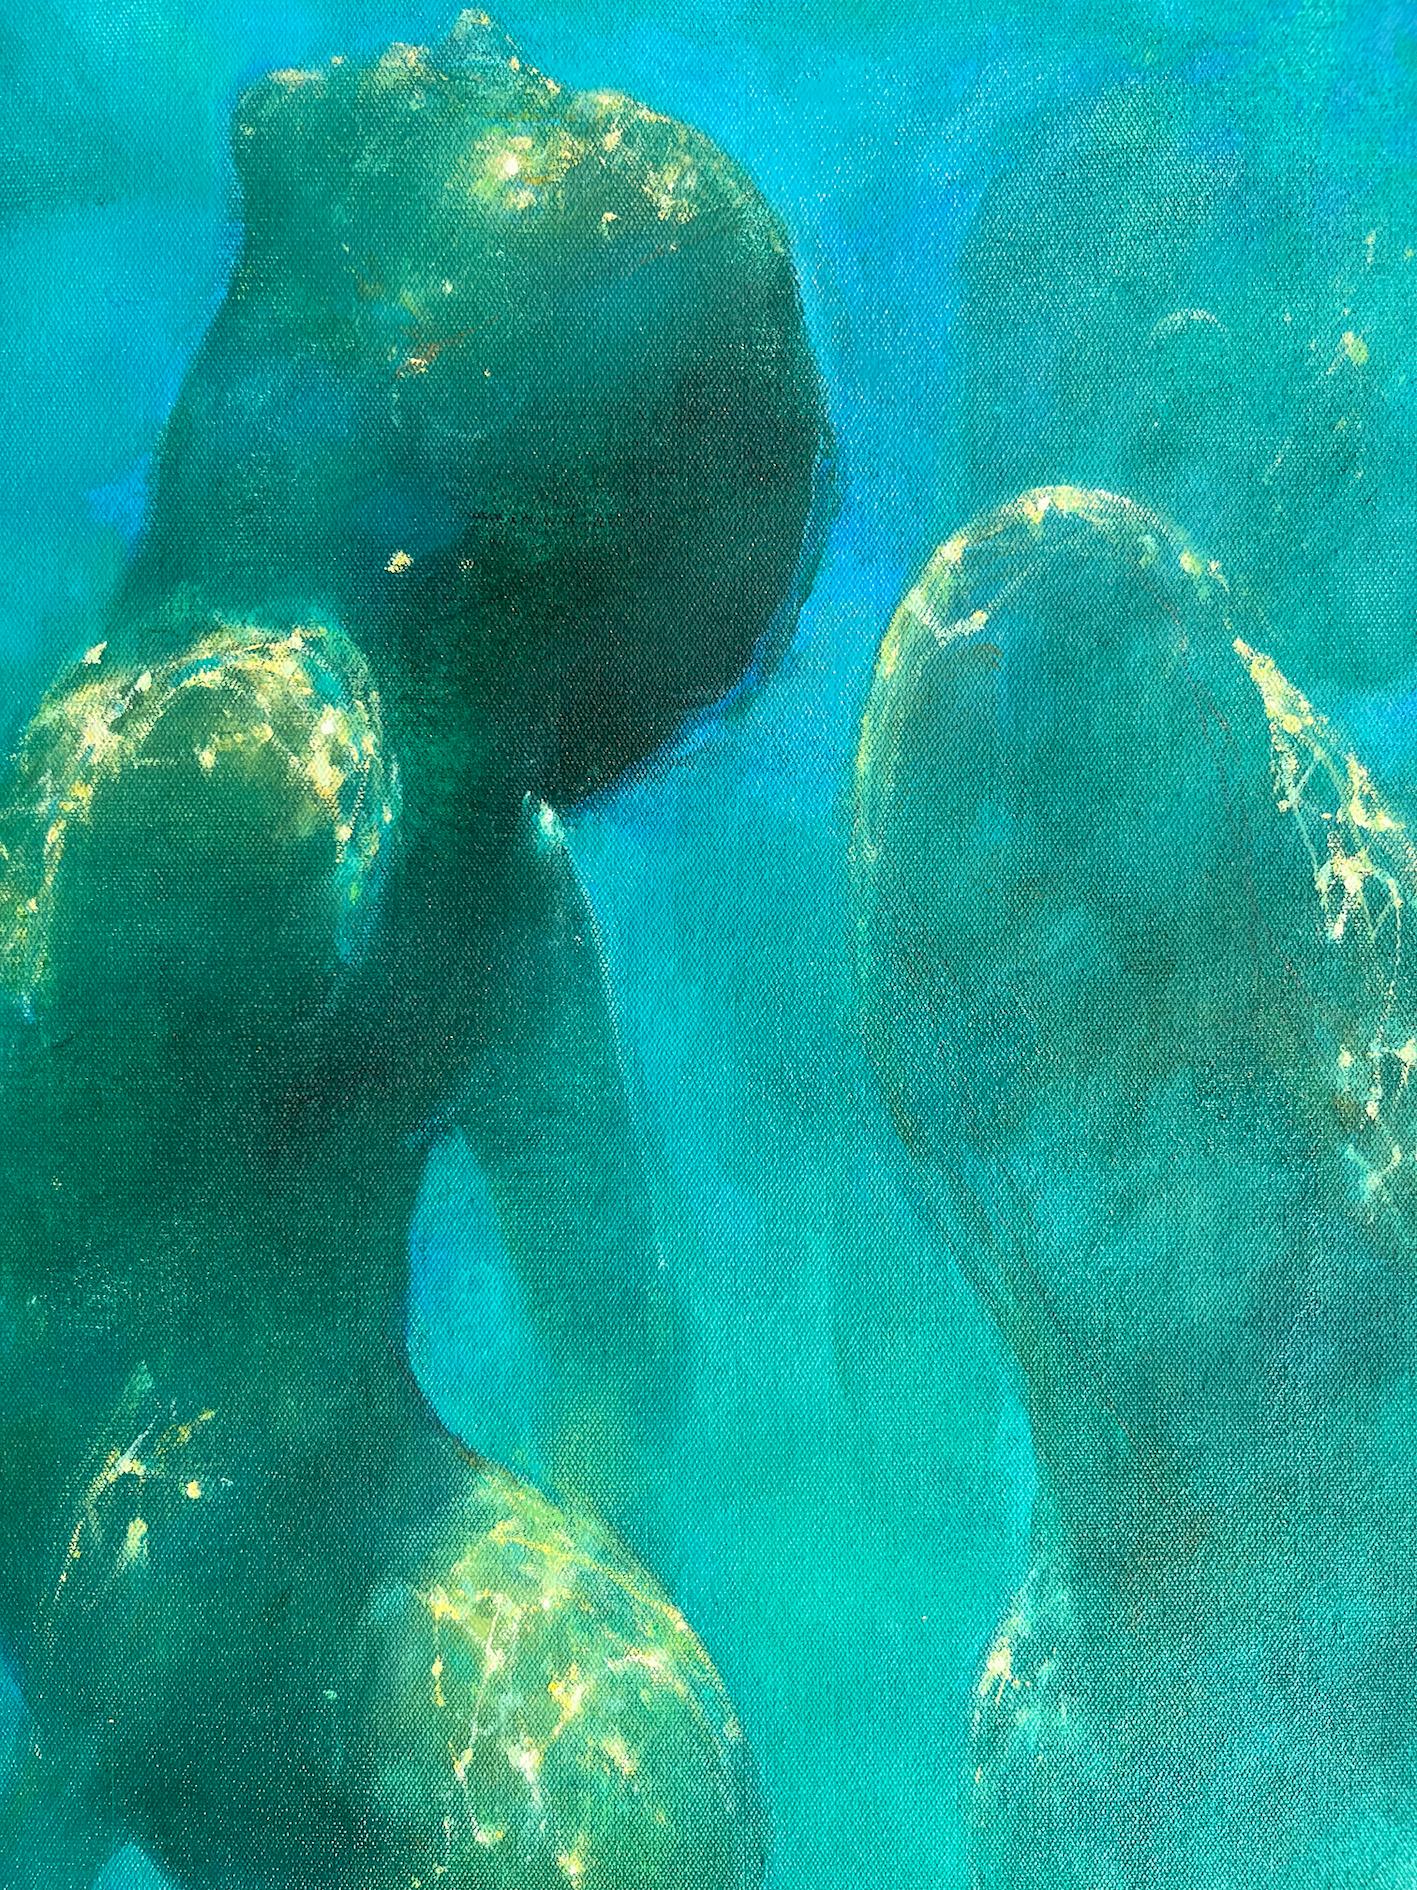  Ocean Whispers - abstract art underwater nude human figurative painting - Blue Abstract Painting by Bill Bate